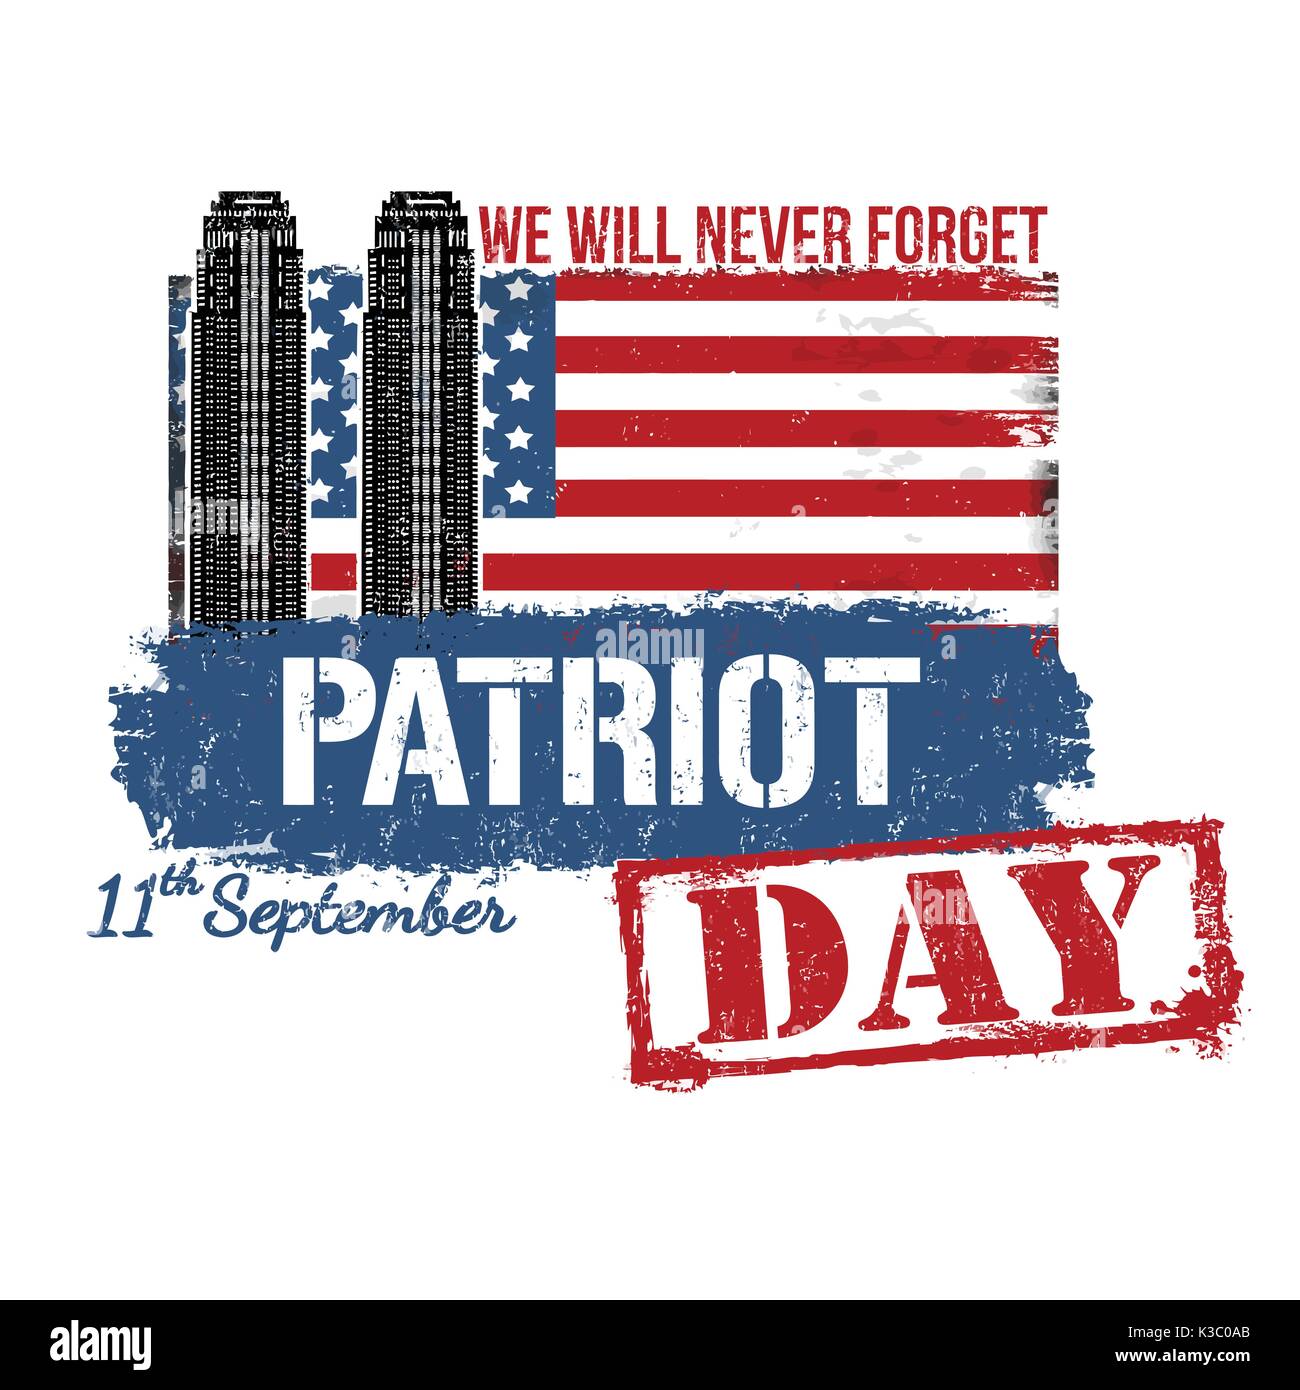 Patriot day poster or card on white background, vector illustration Stock Vector